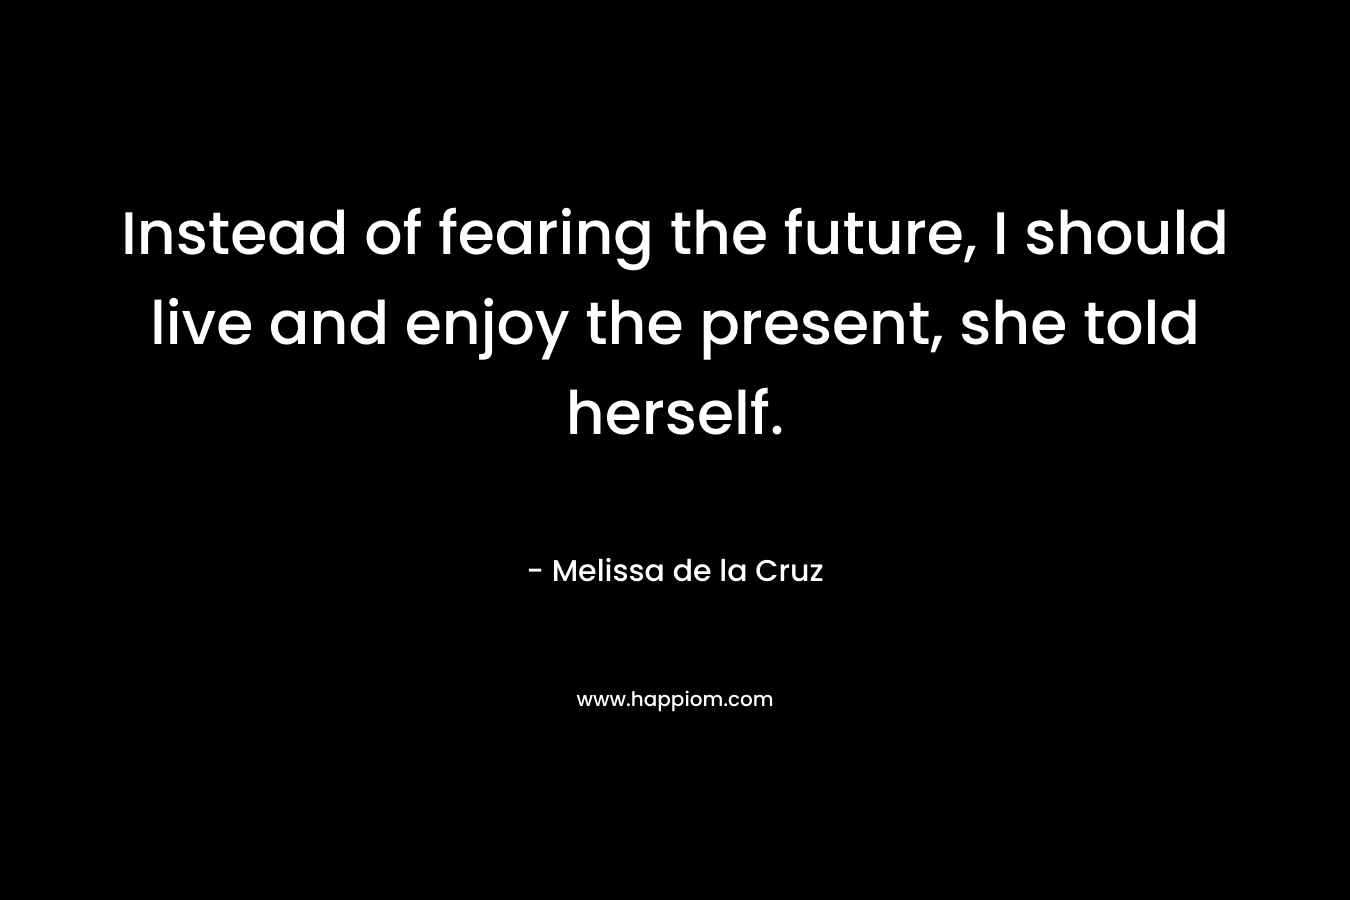 Instead of fearing the future, I should live and enjoy the present, she told herself. – Melissa de la Cruz